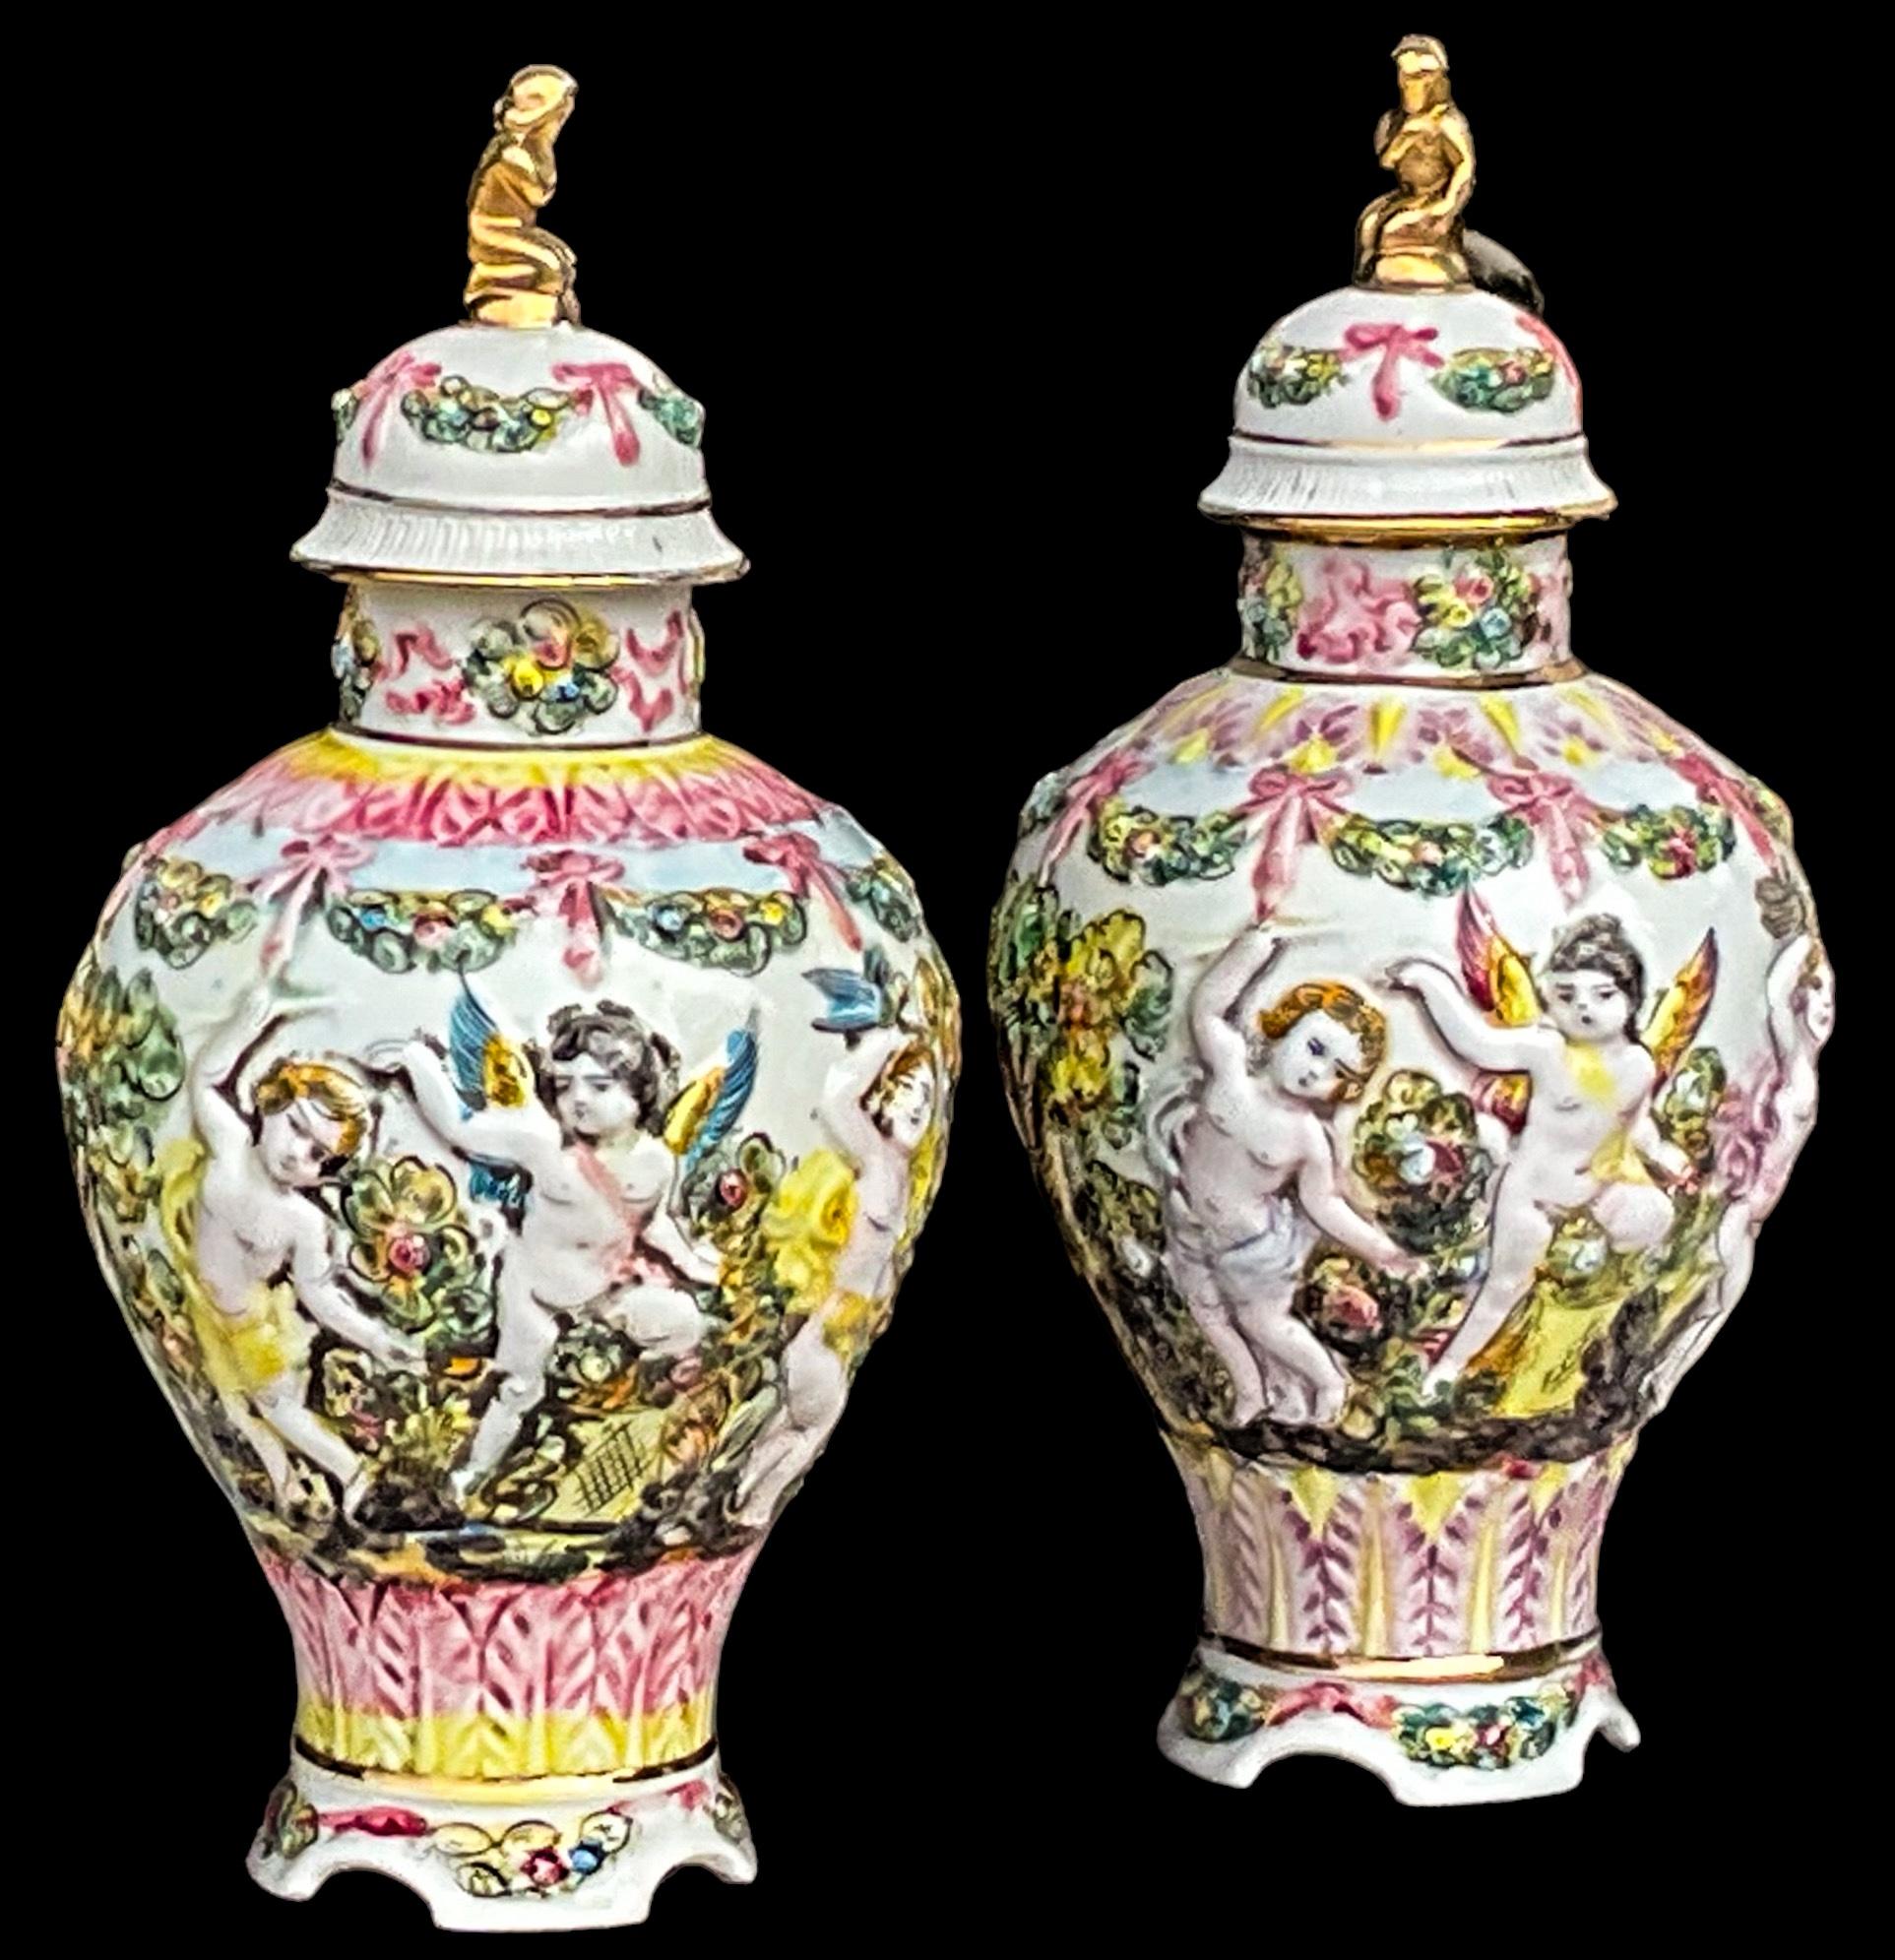 This is a pair of rococo style Italian Capodimonte pottery and gilt hand painted ginger jars. They are marked and in very good condition. 